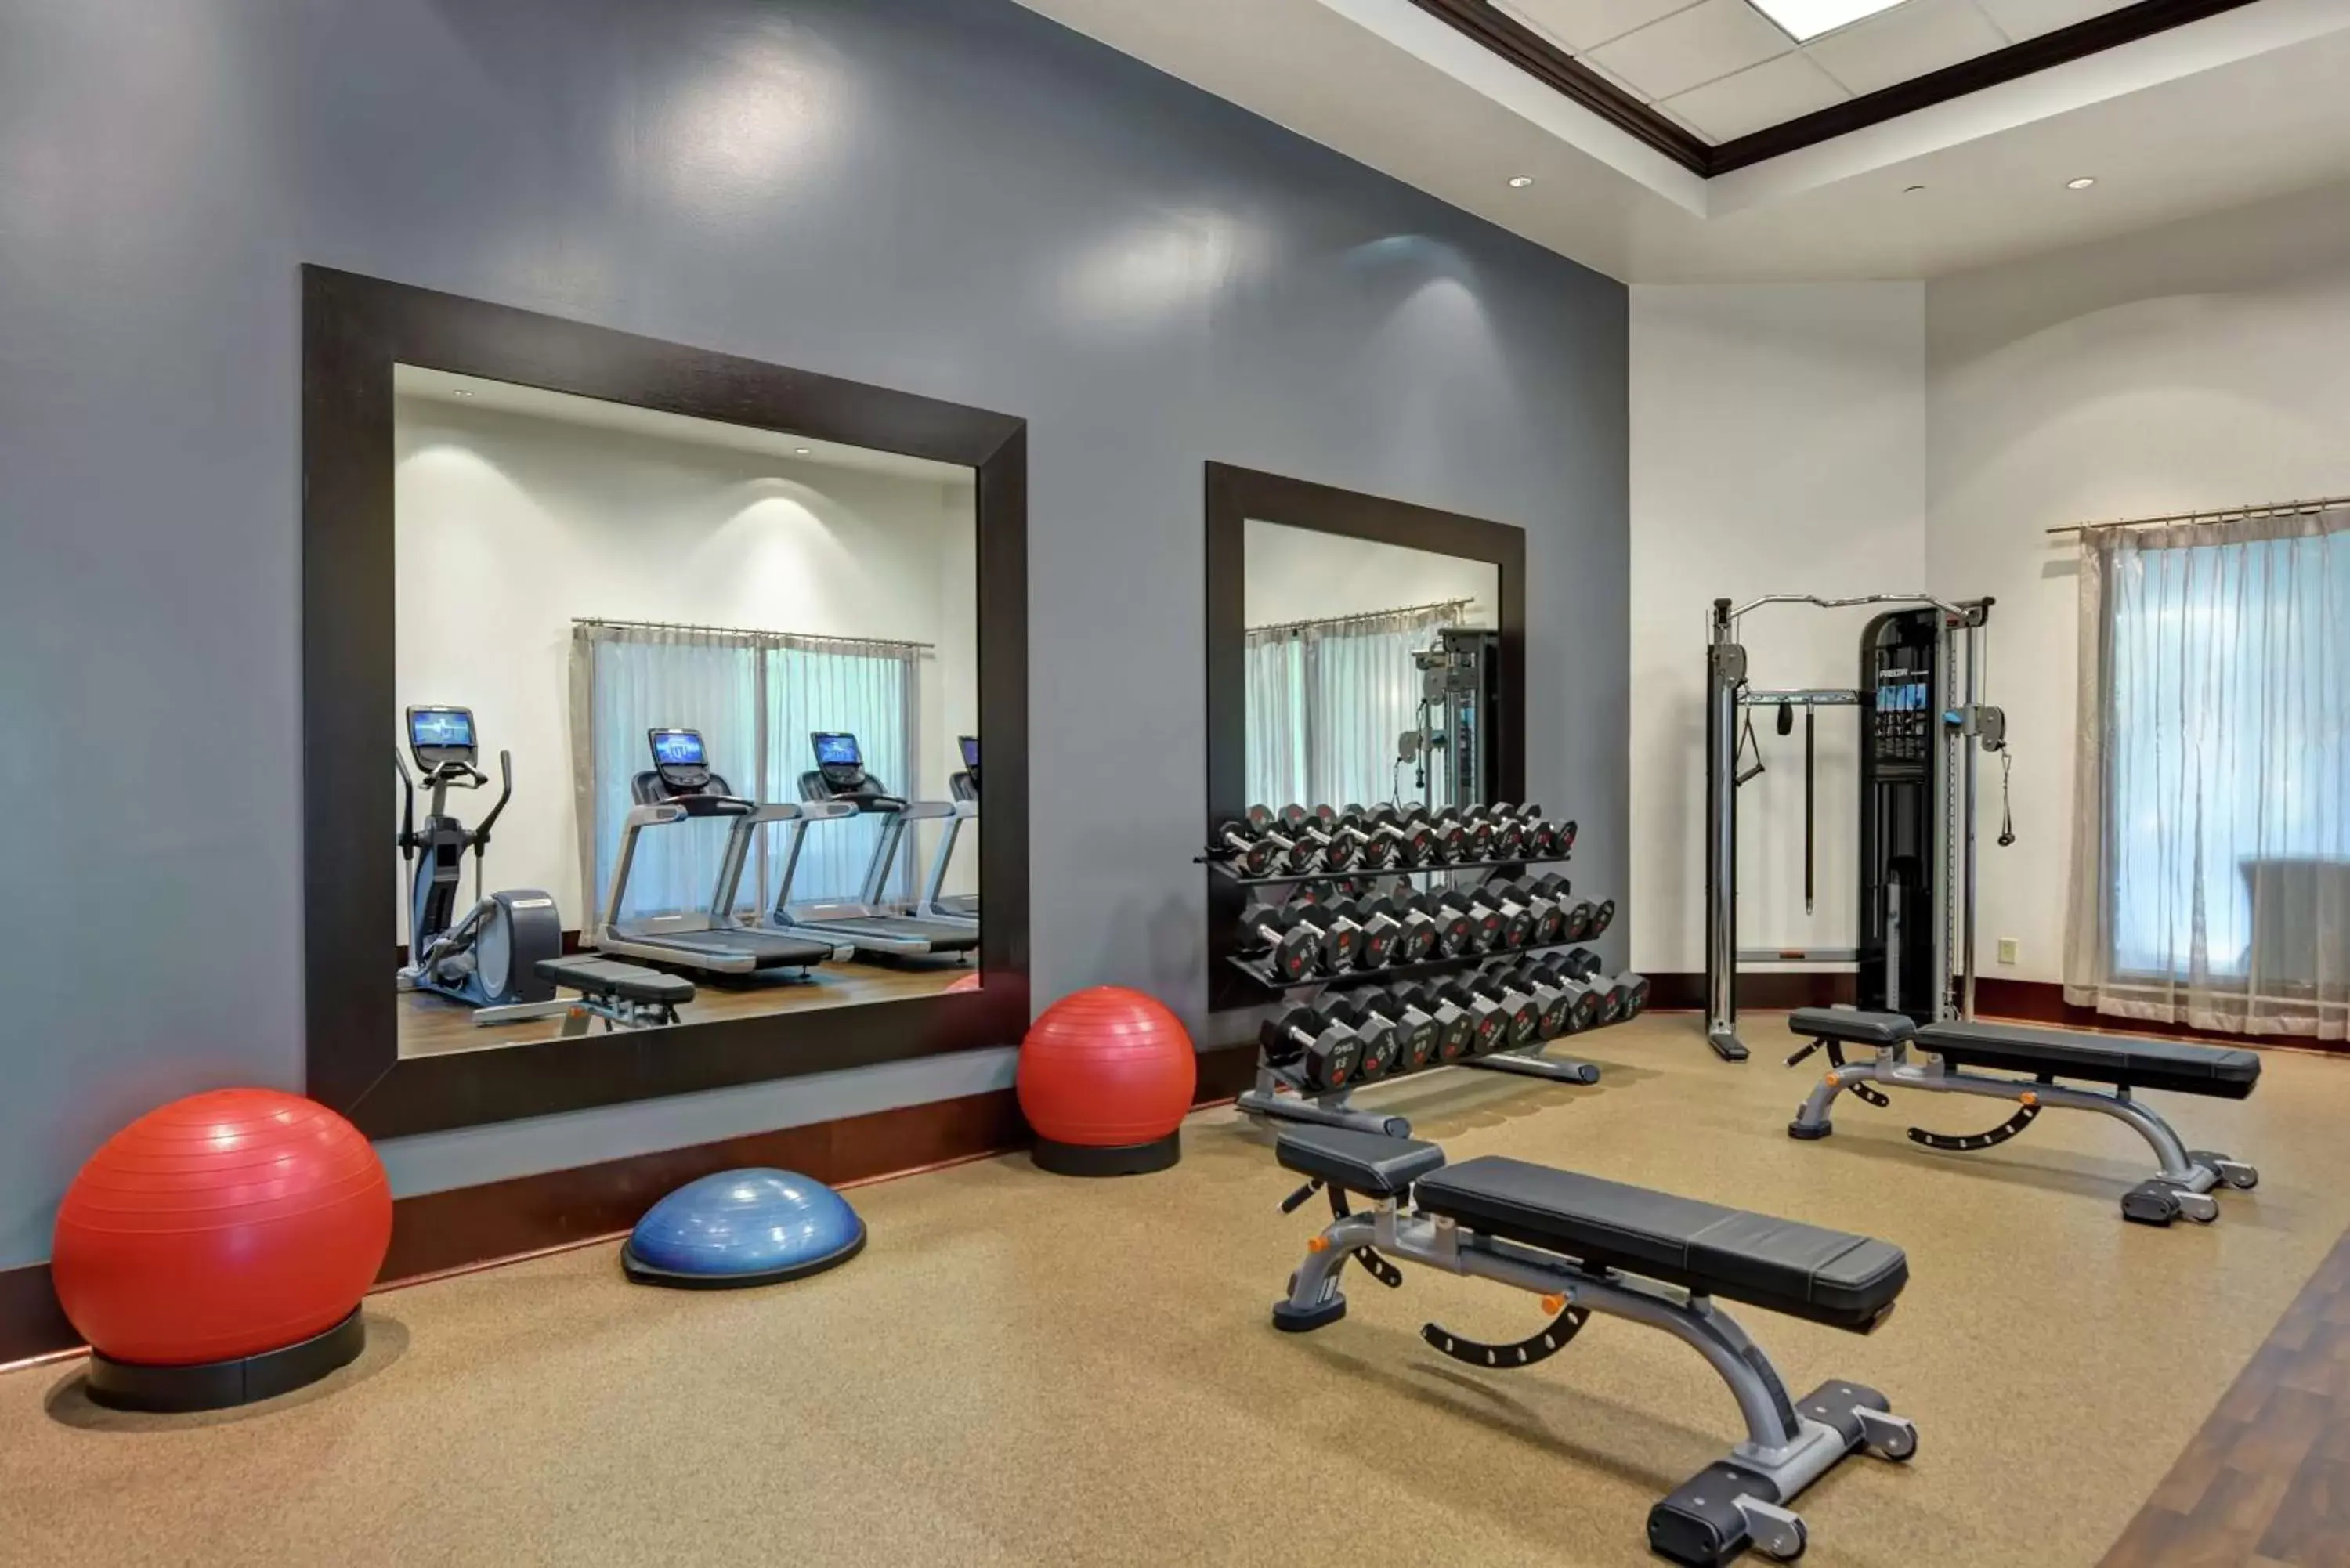 Fitness centre/facilities, Fitness Center/Facilities in Embassy Suites Savannah Airport